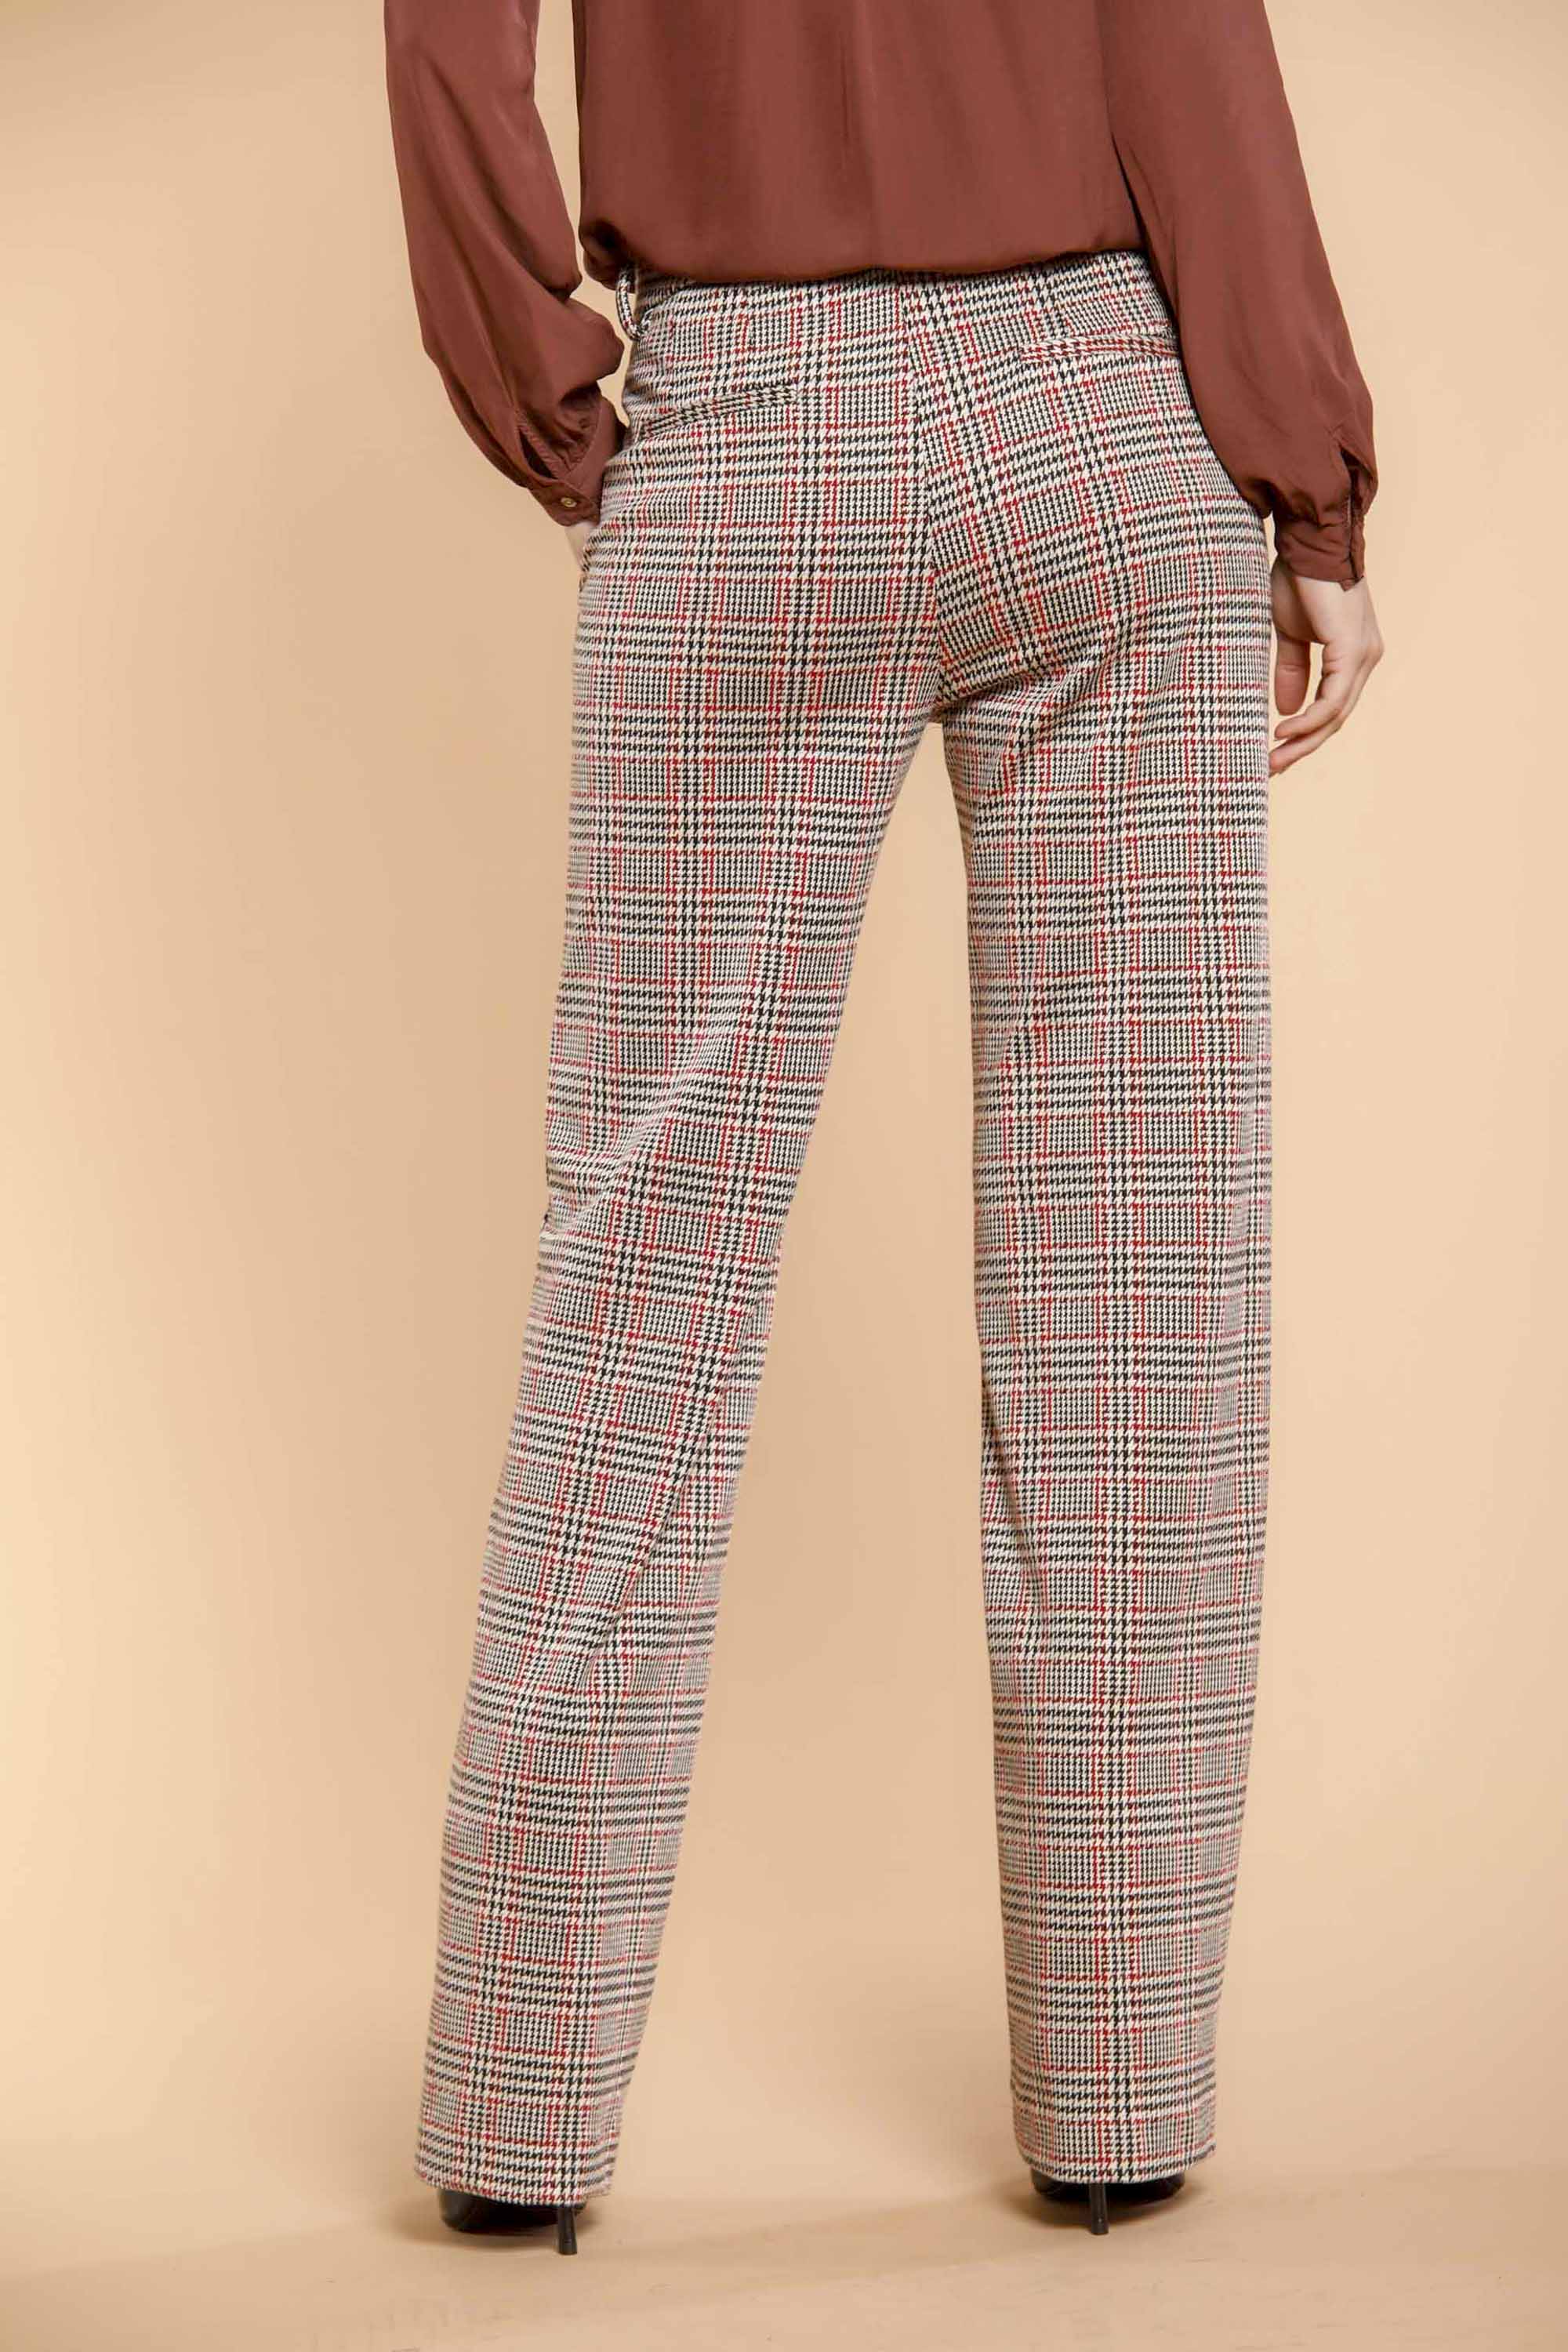 Image 3 of women's chino pants  in beige jersey with wales pattern New York Straight model by Mason's